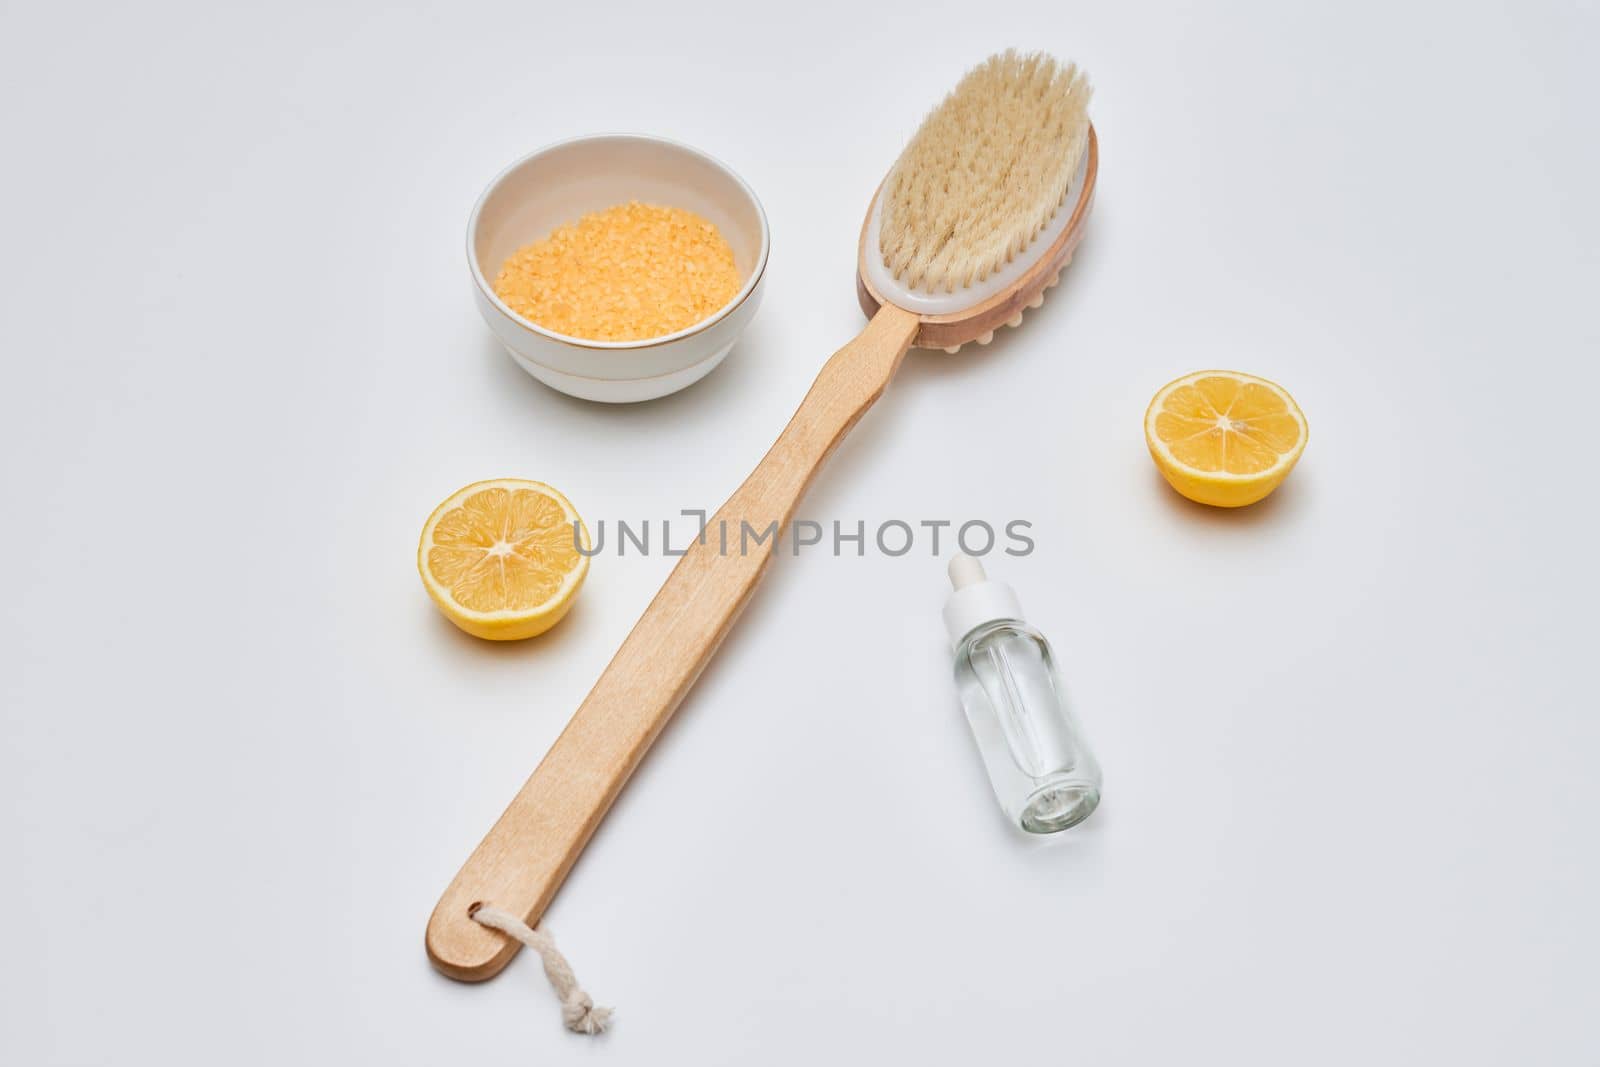 a wooden brush and some lemons on a white surface with a small bottle of essential oil in the background